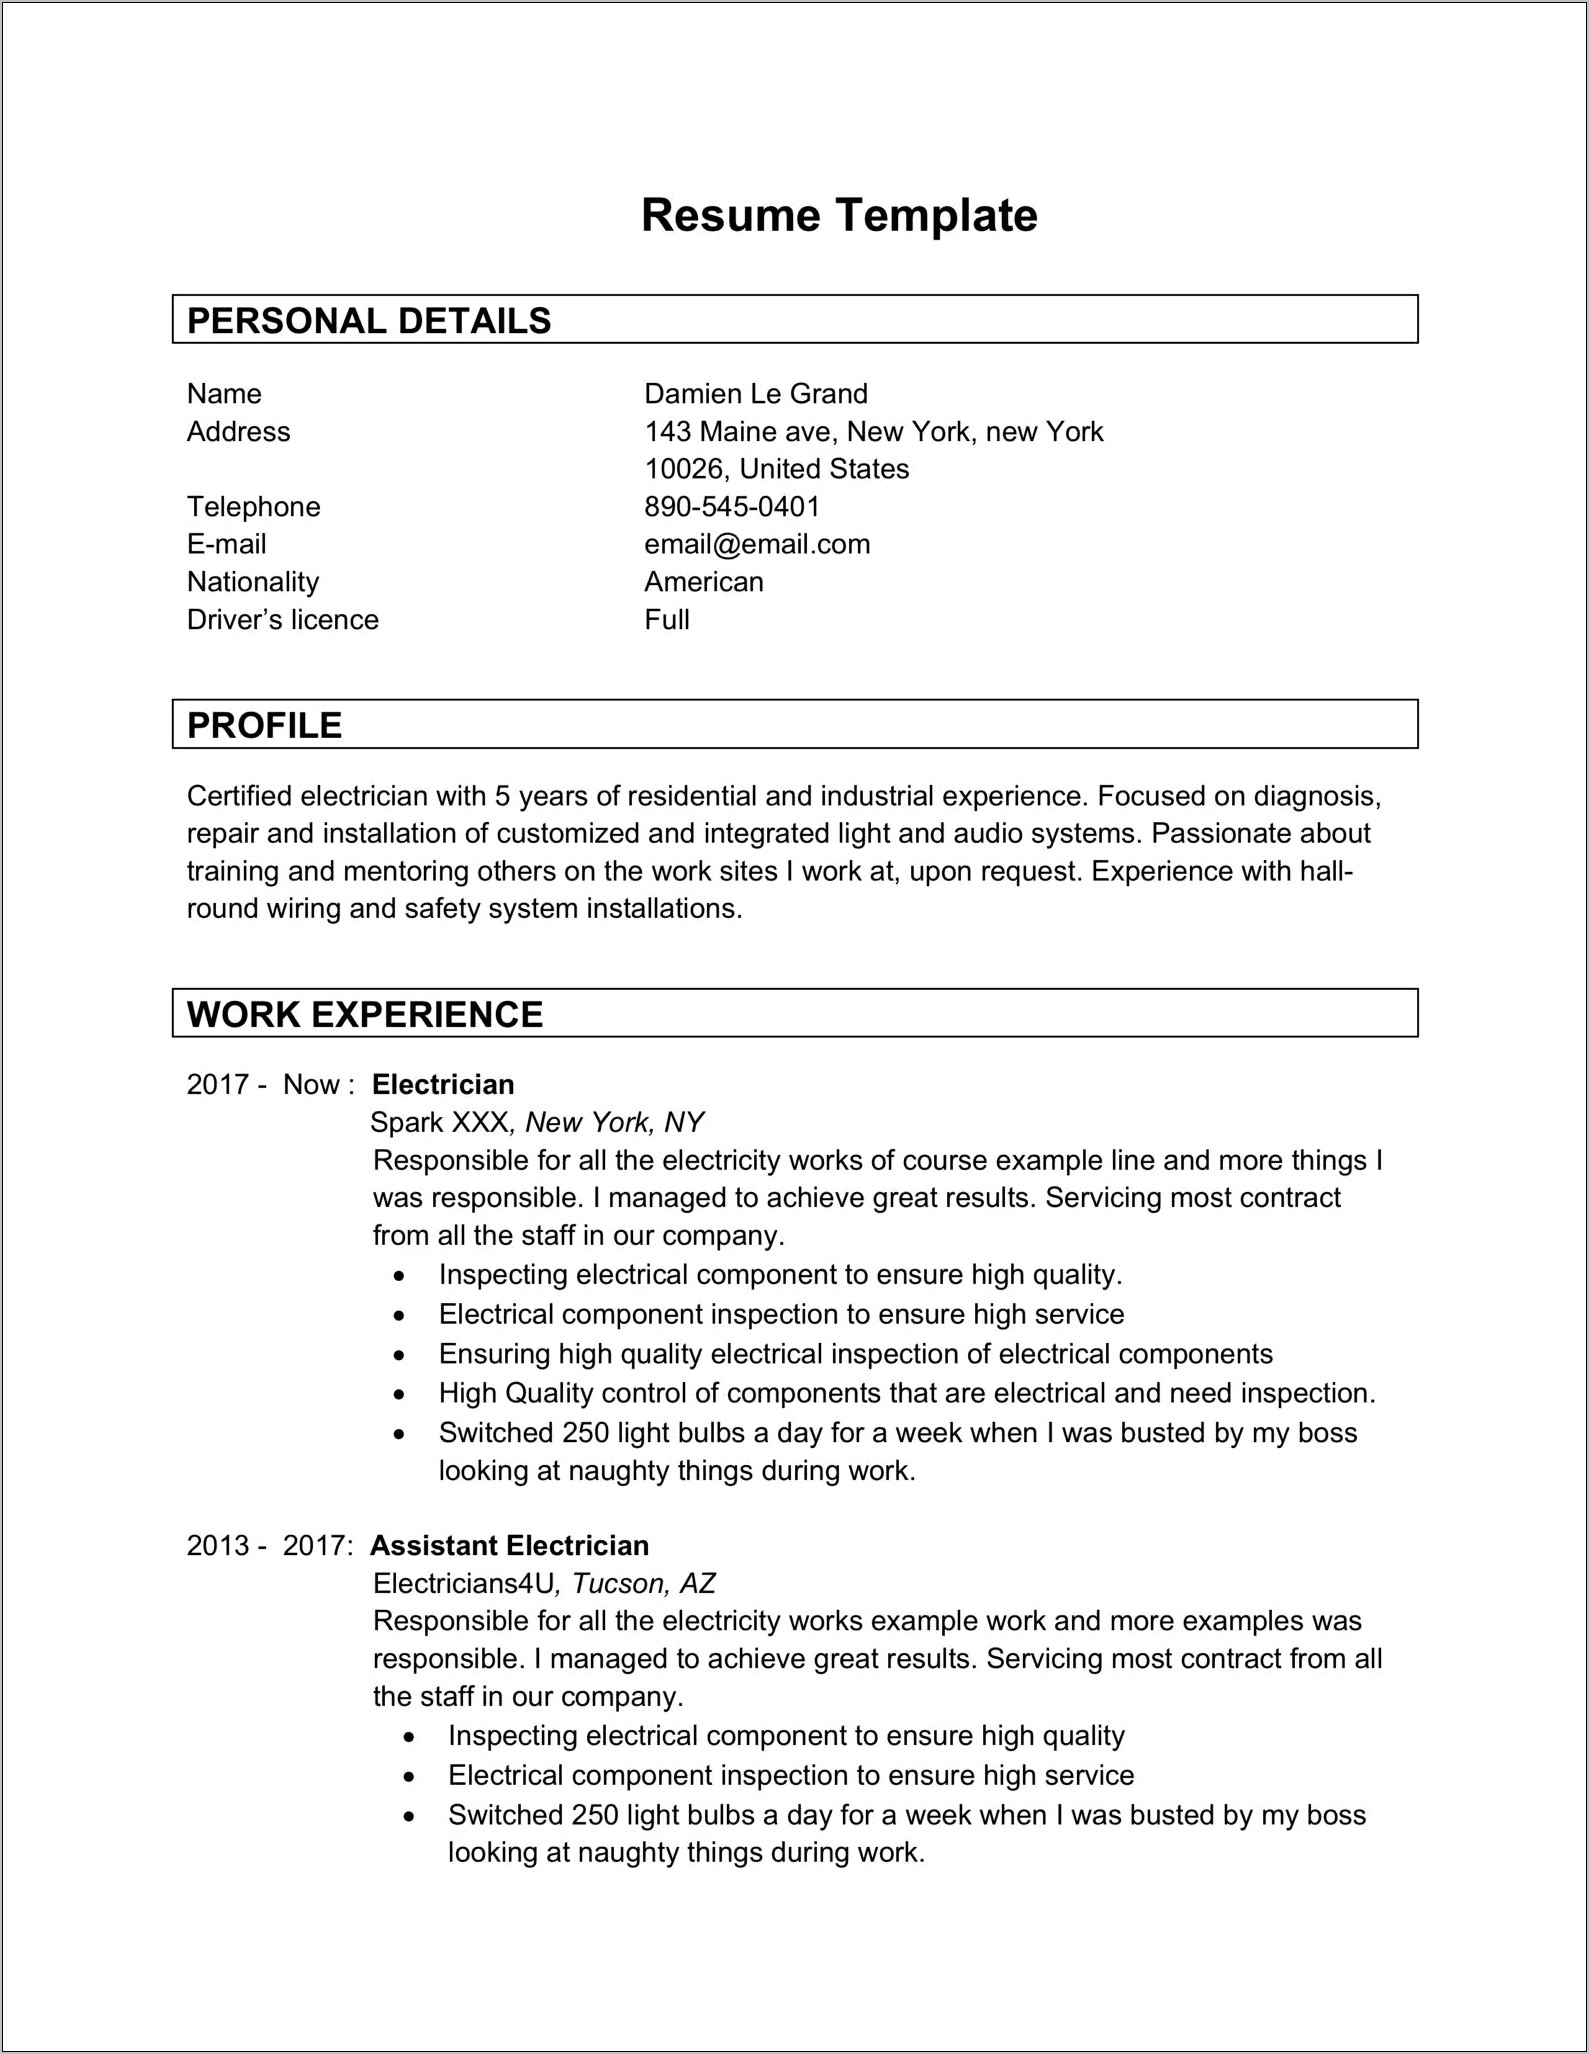 Best Personal Profile For Resume